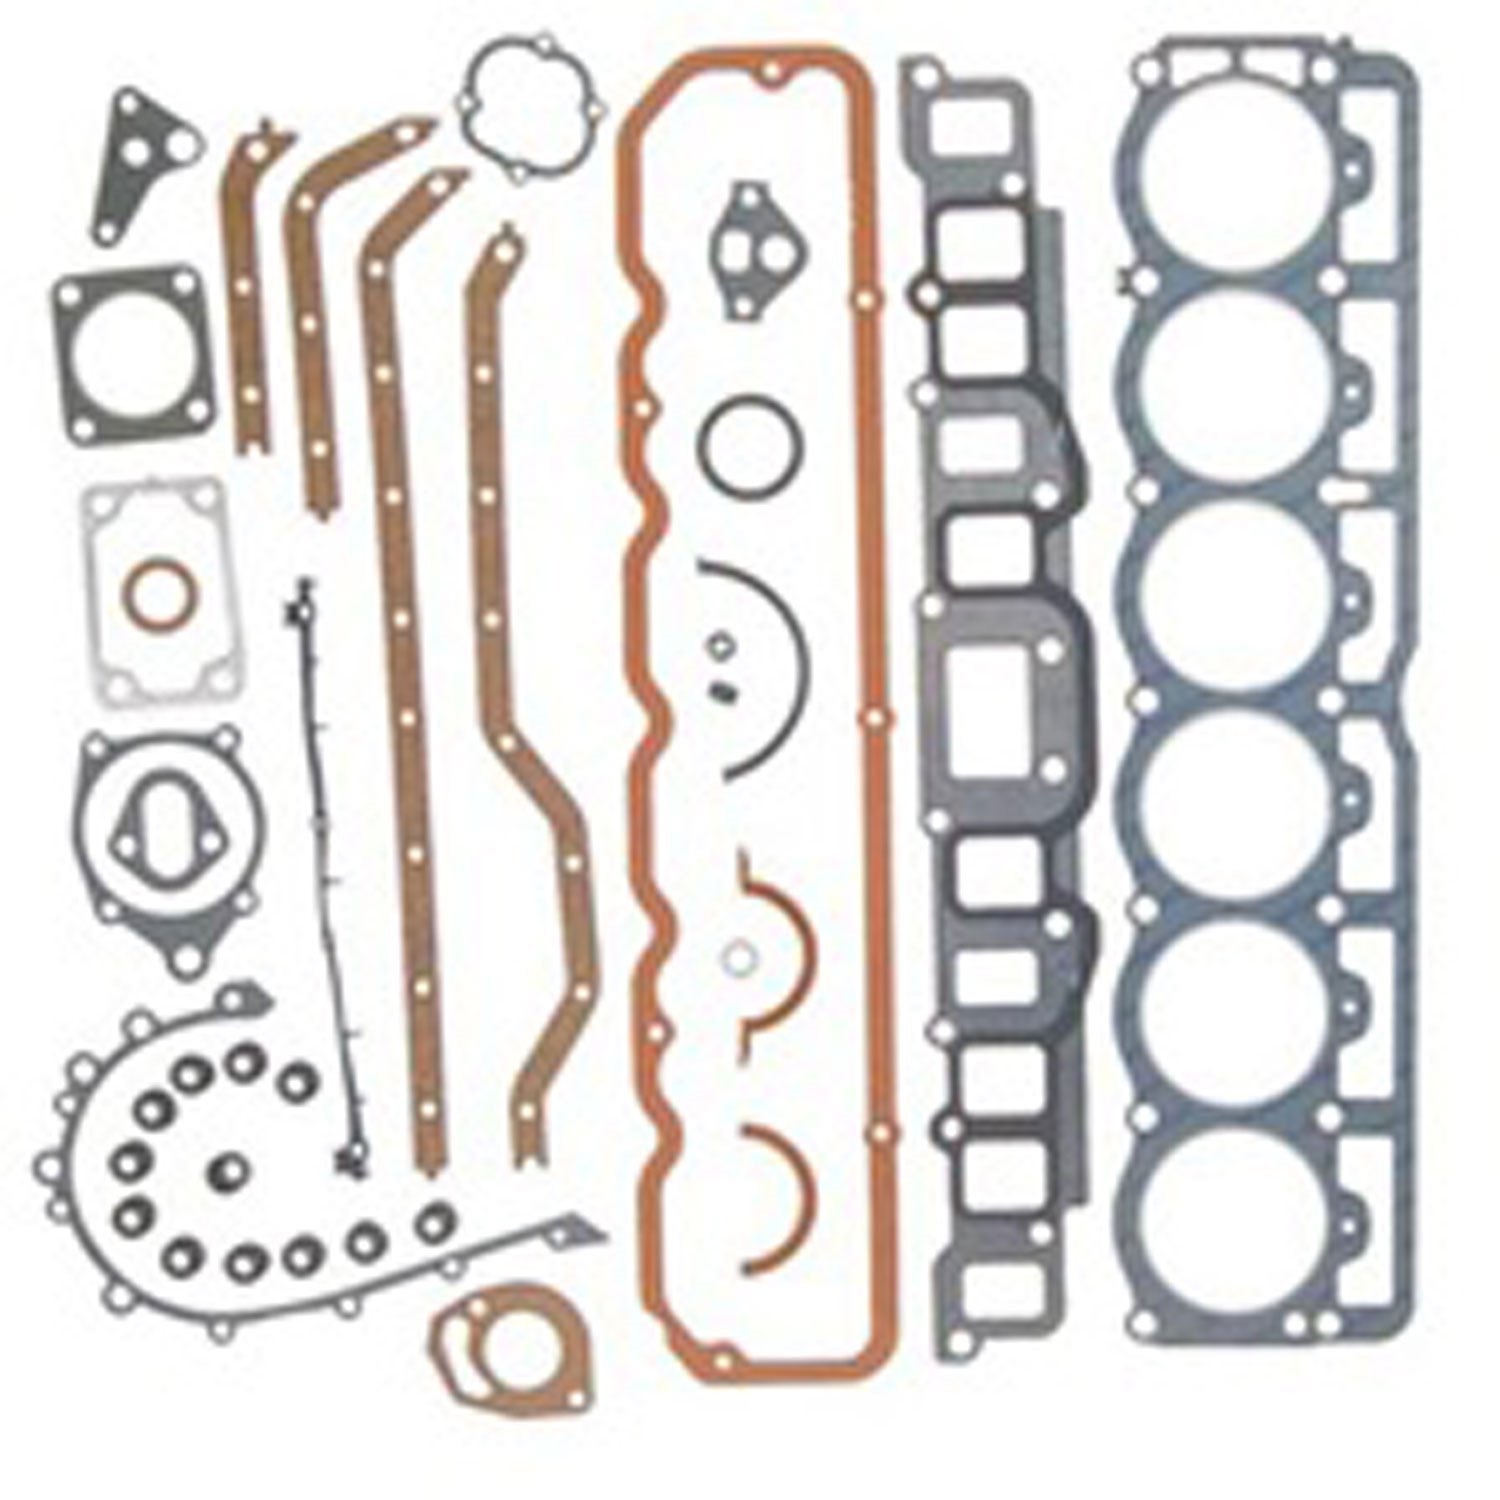 This full engine gasket set from Omix-ADA fits